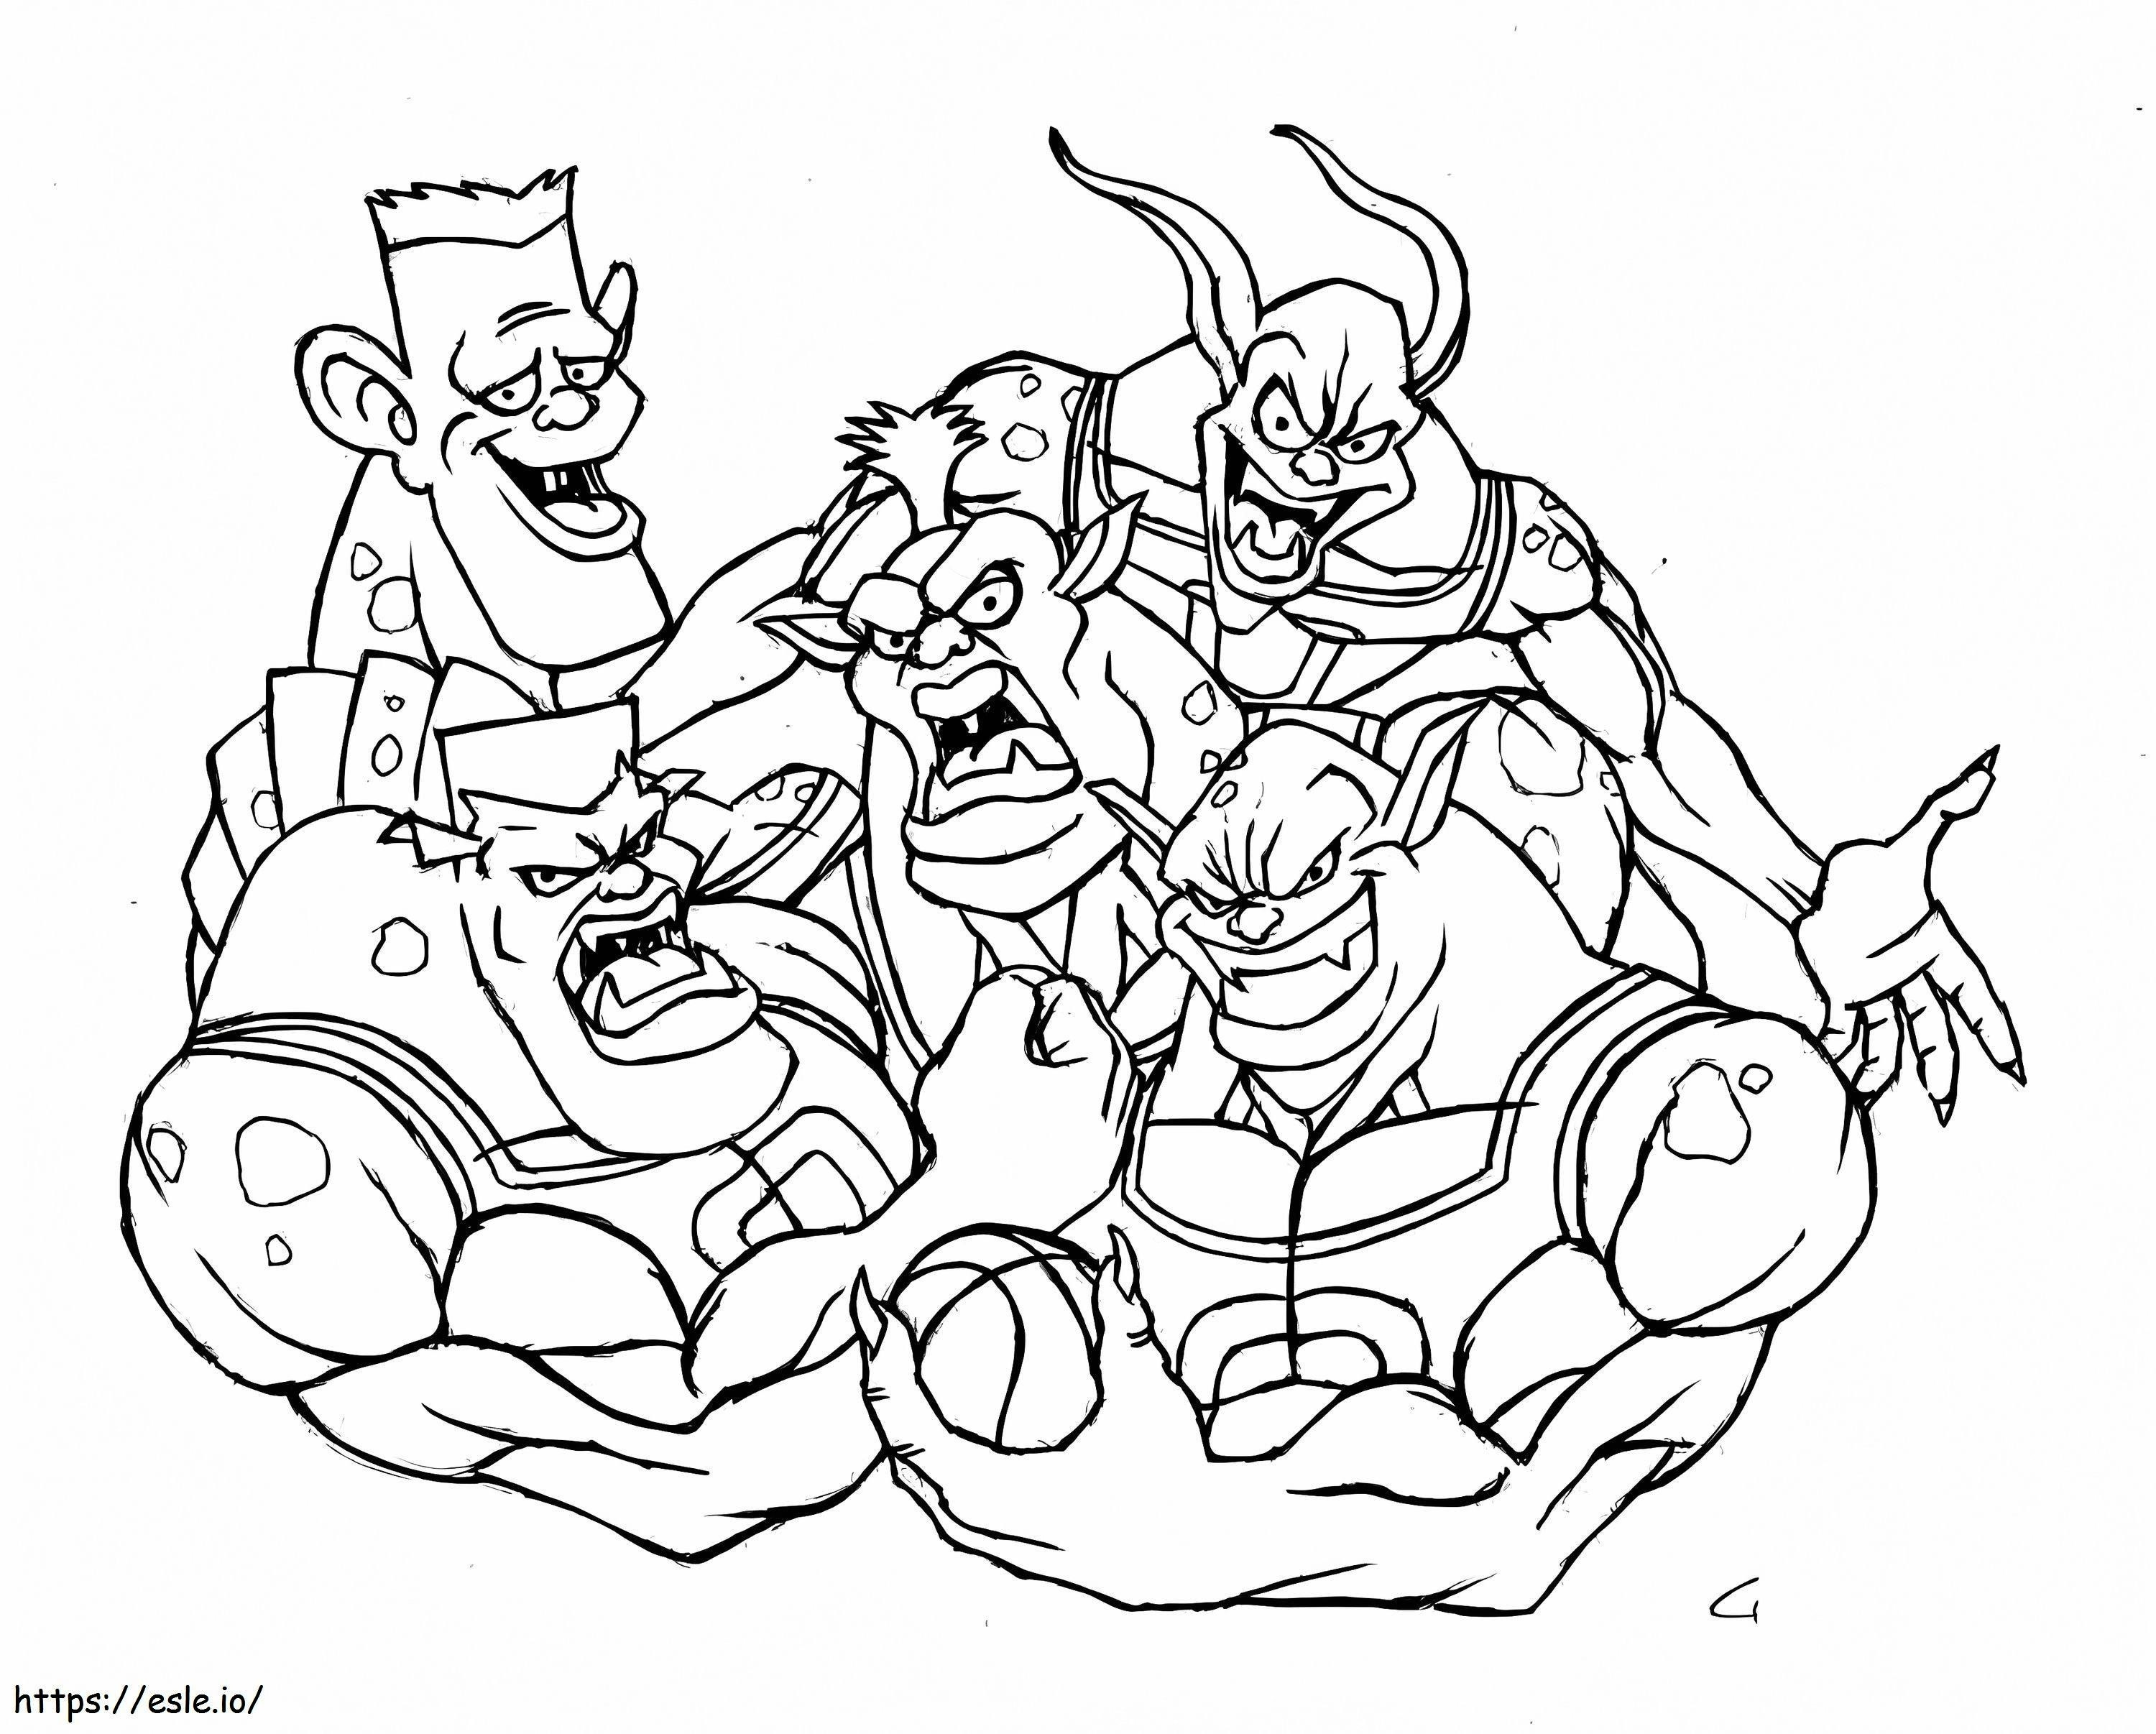 Monster Team Space Jam coloring page